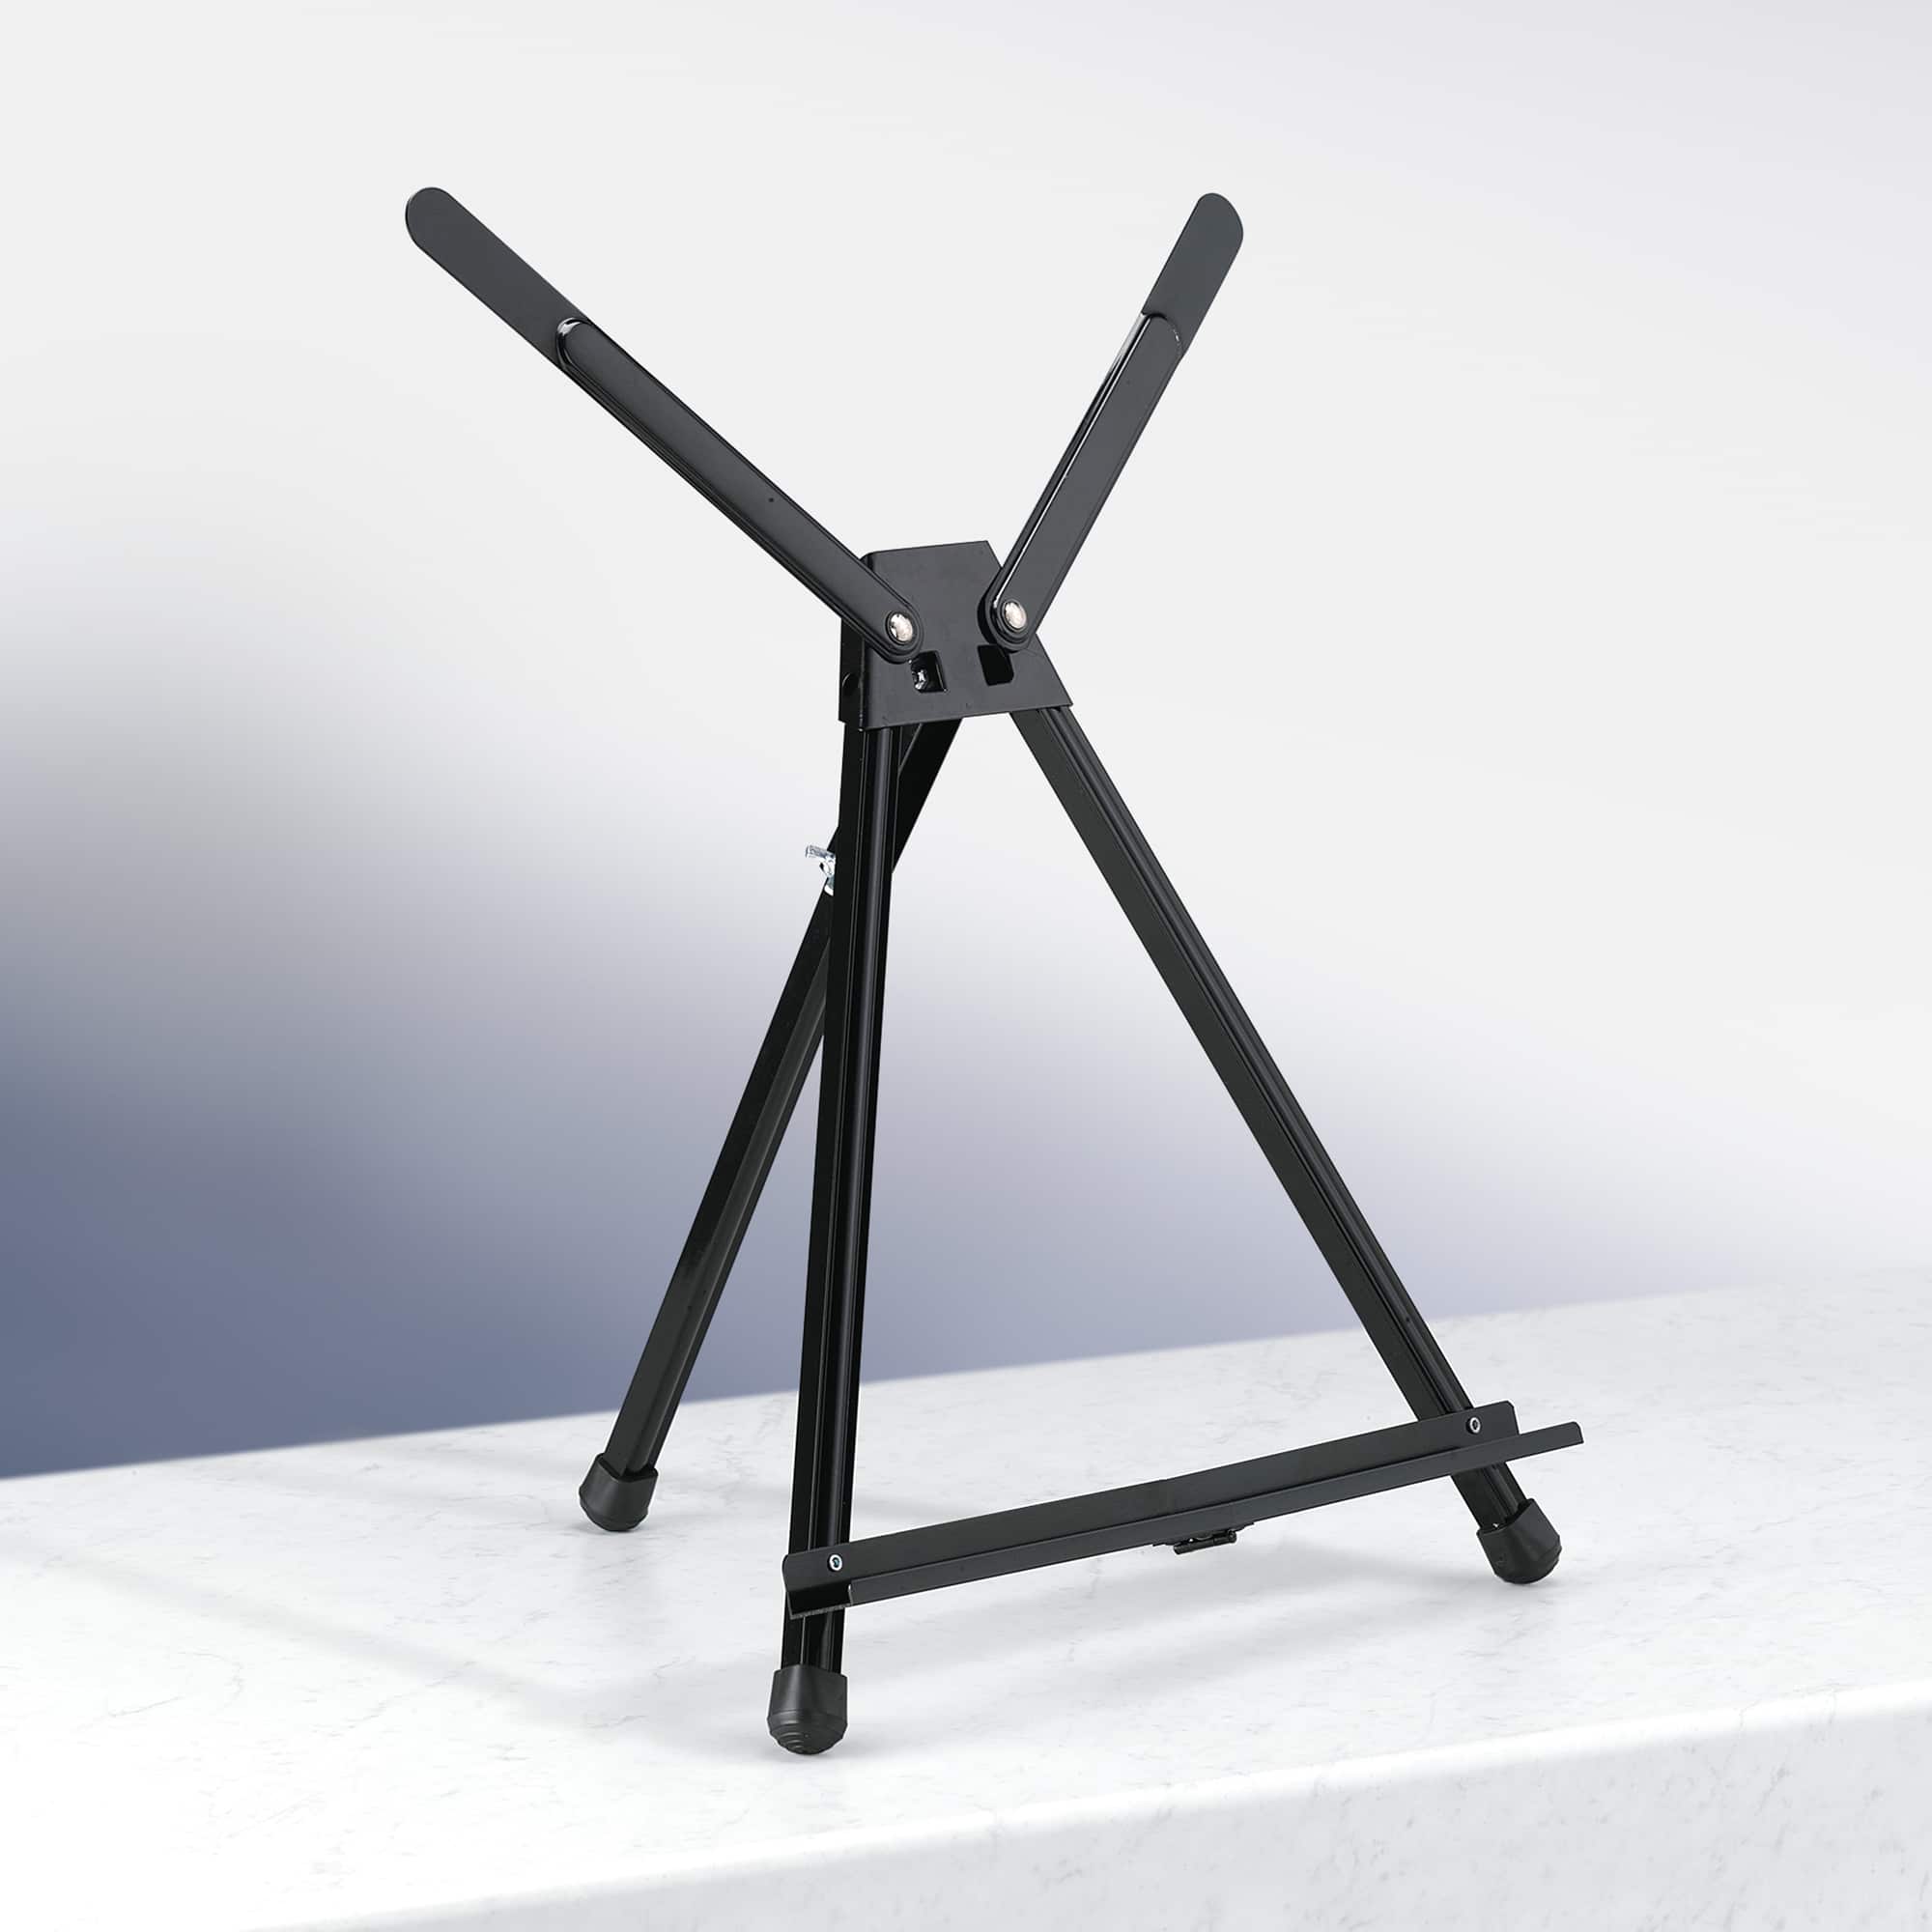 Artist's Loft Adjustable All Media Tabletop Surface Easel with T Square (2  Pack)